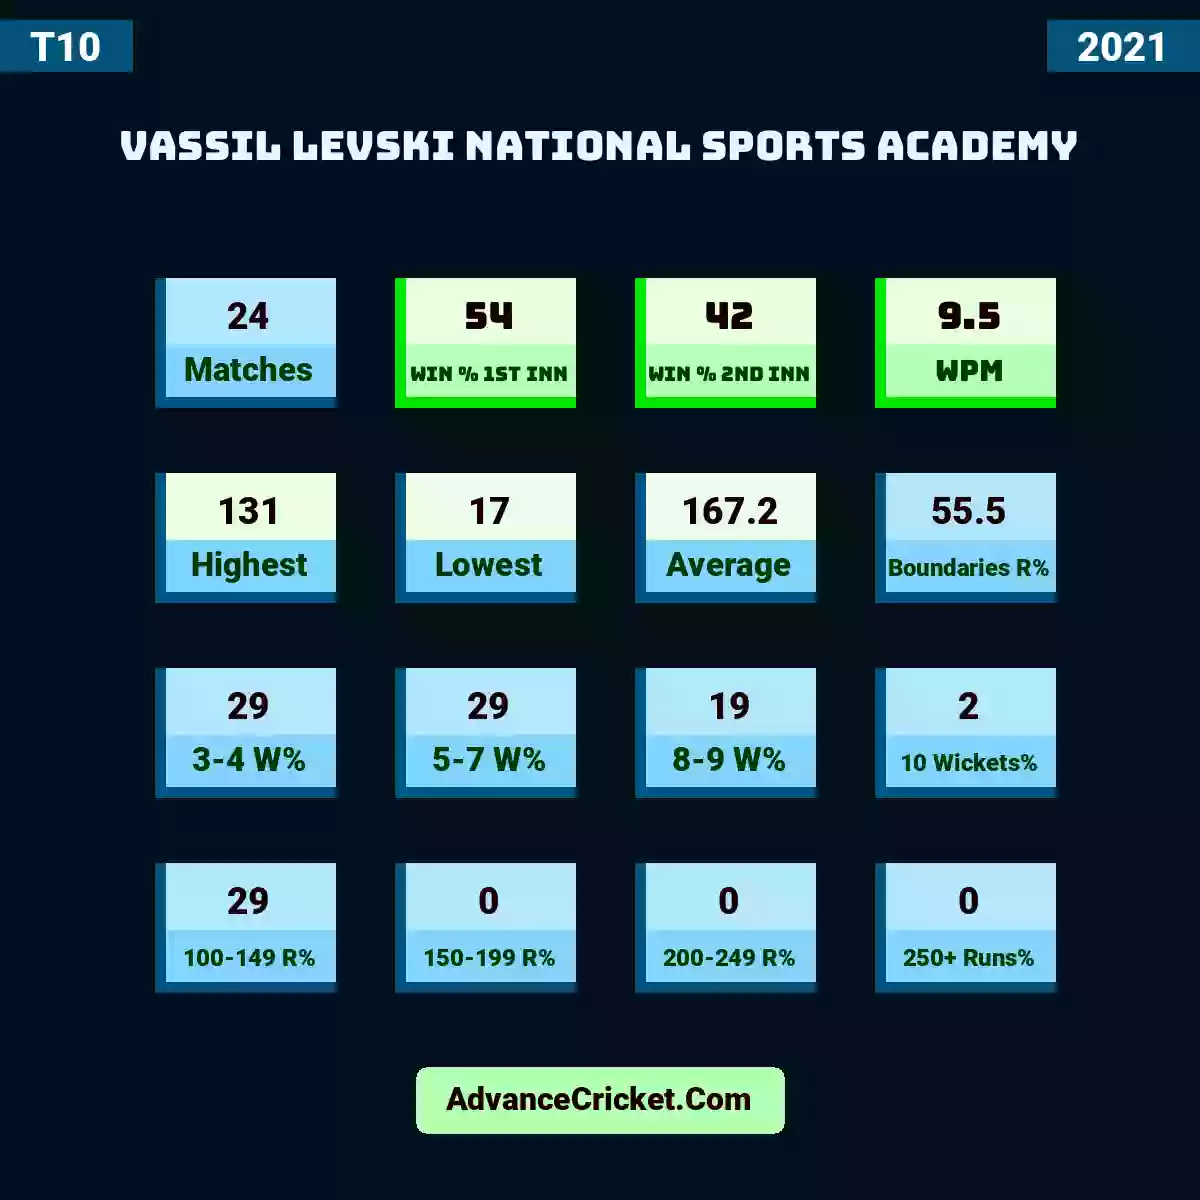 Image showing Vassil Levski National Sports Academy with Matches: 24, Win % 1st Inn: 54, Win % 2nd Inn: 42, WPM: 9.5, Highest: 131, Lowest: 17, Average: 167.2, Boundaries R%: 55.5, 3-4 W%: 29, 5-7 W%: 29, 8-9 W%: 19, 10 Wickets%: 2, 100-149 R%: 29, 150-199 R%: 0, 200-249 R%: 0, 250+ Runs%: 0.